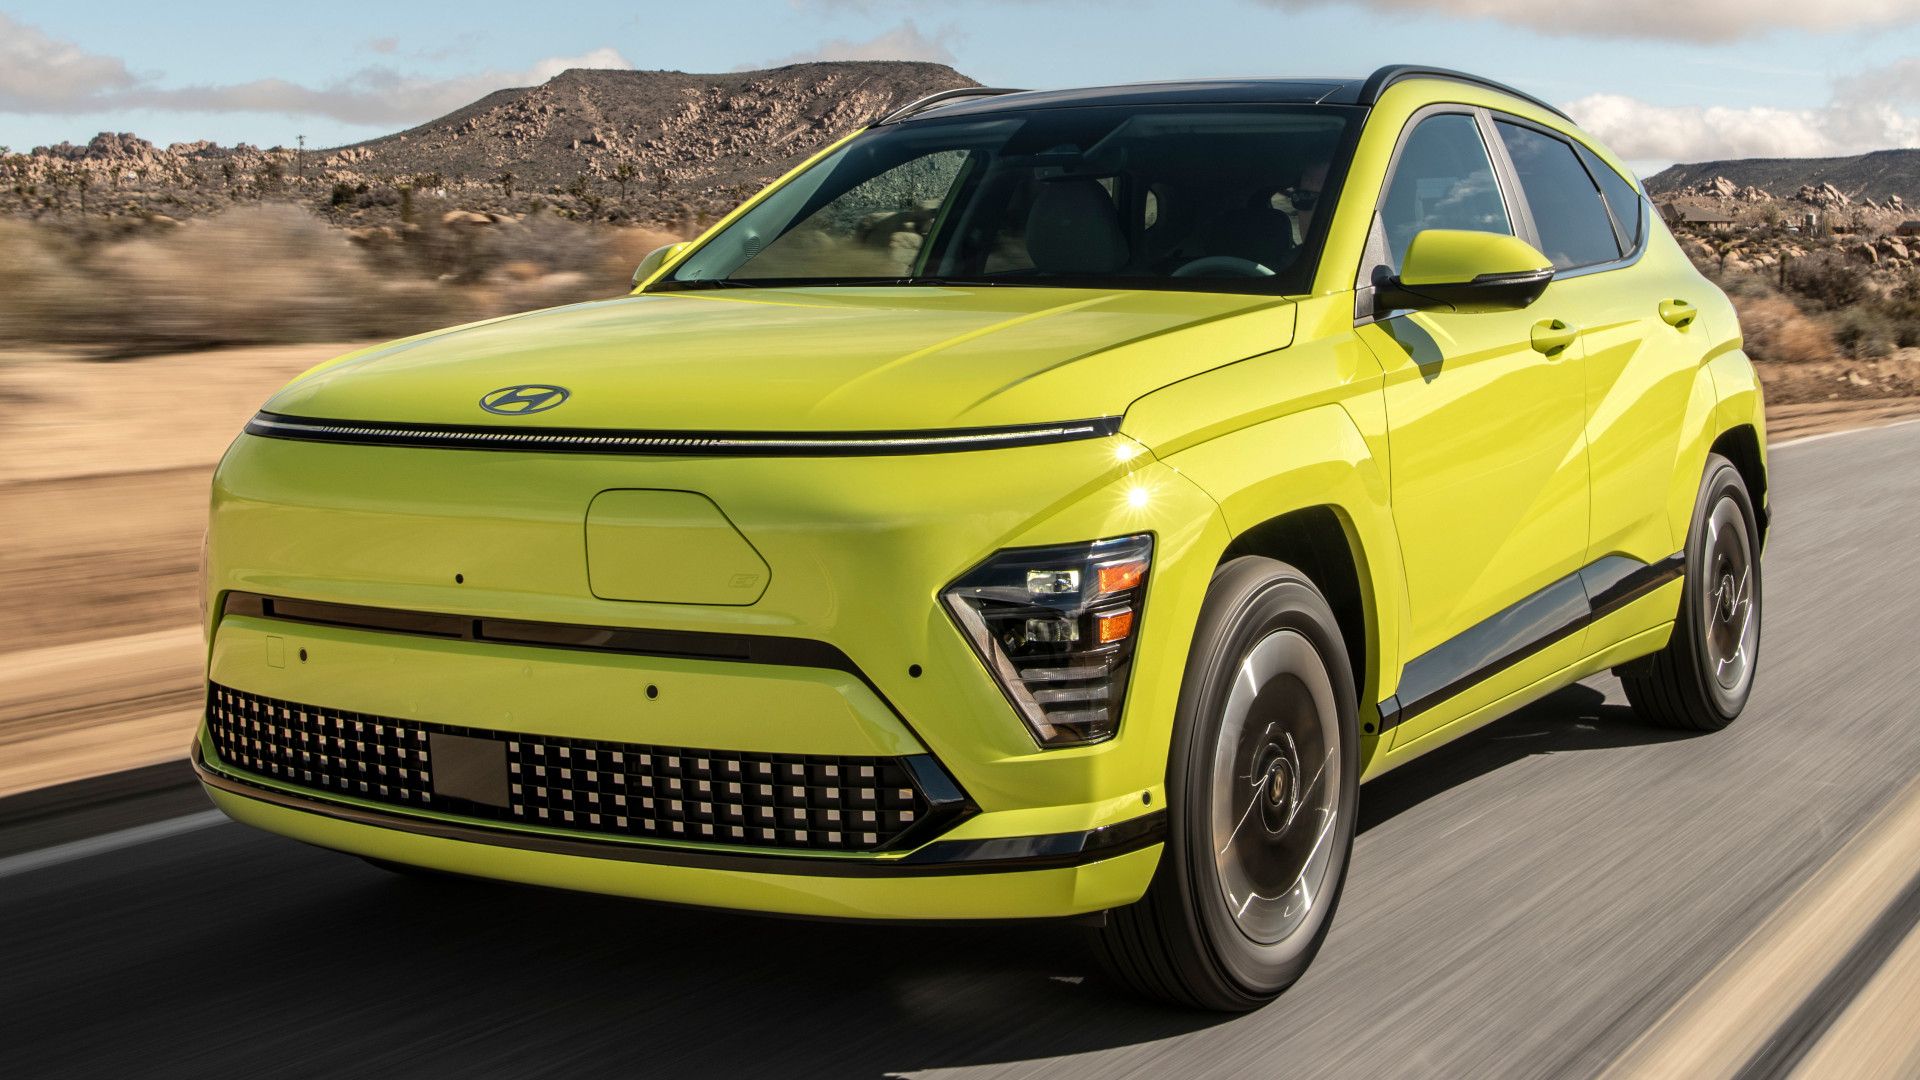 2024 Hyundai Kona A Comprehensive Guide On Features, Specs, And Pricing